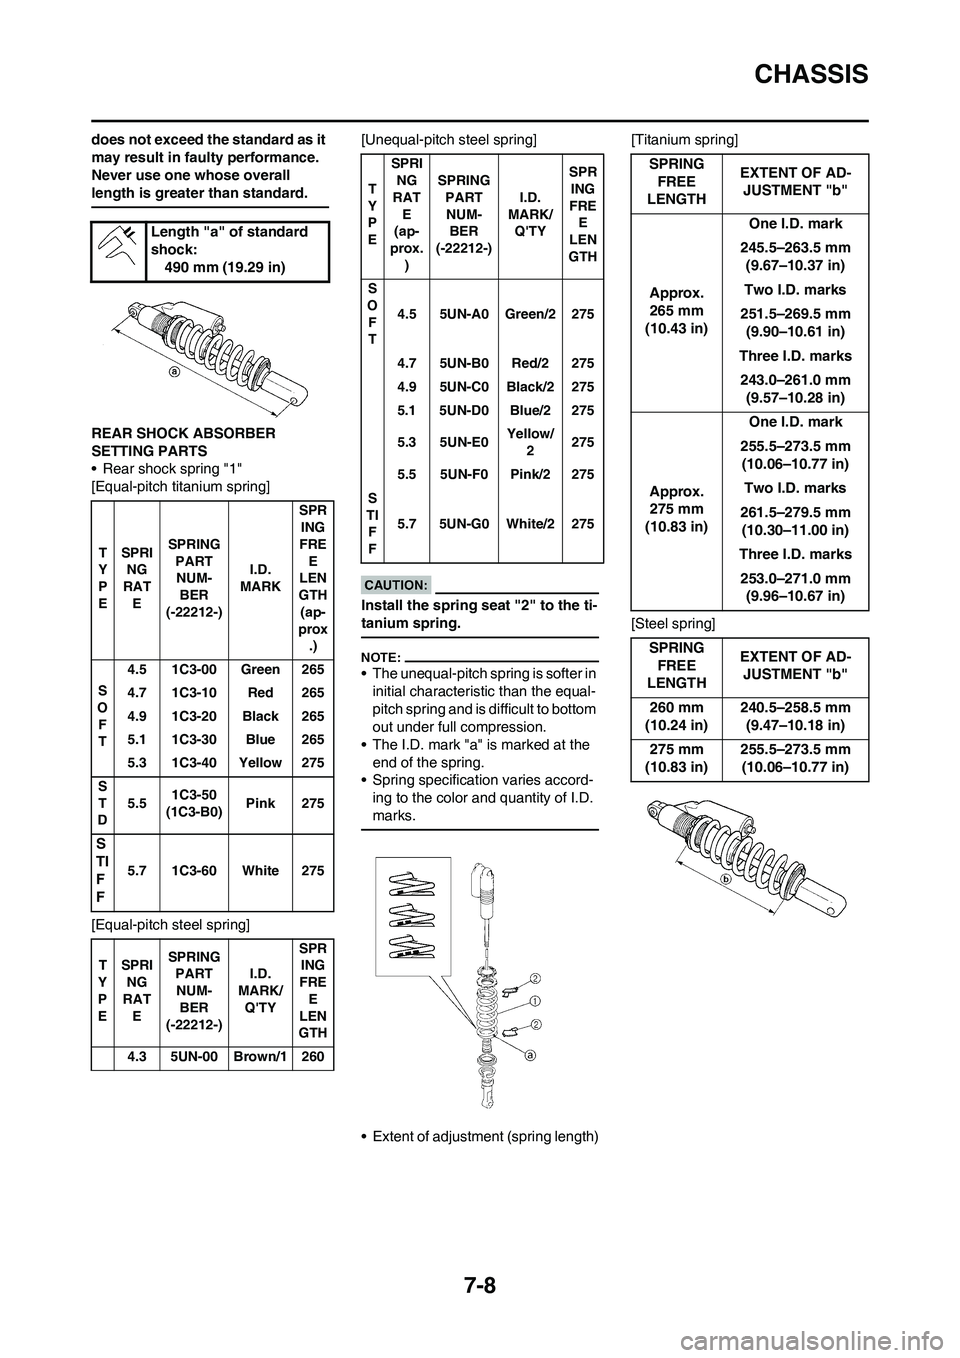 YAMAHA YZ450F 2008 User Guide 7-8
CHASSIS
does not exceed the standard as it 
may result in faulty performance. 
Never use one whose overall 
length is greater than standard.
REAR SHOCK ABSORBER 
SETTING PARTS
• Rear shock sprin